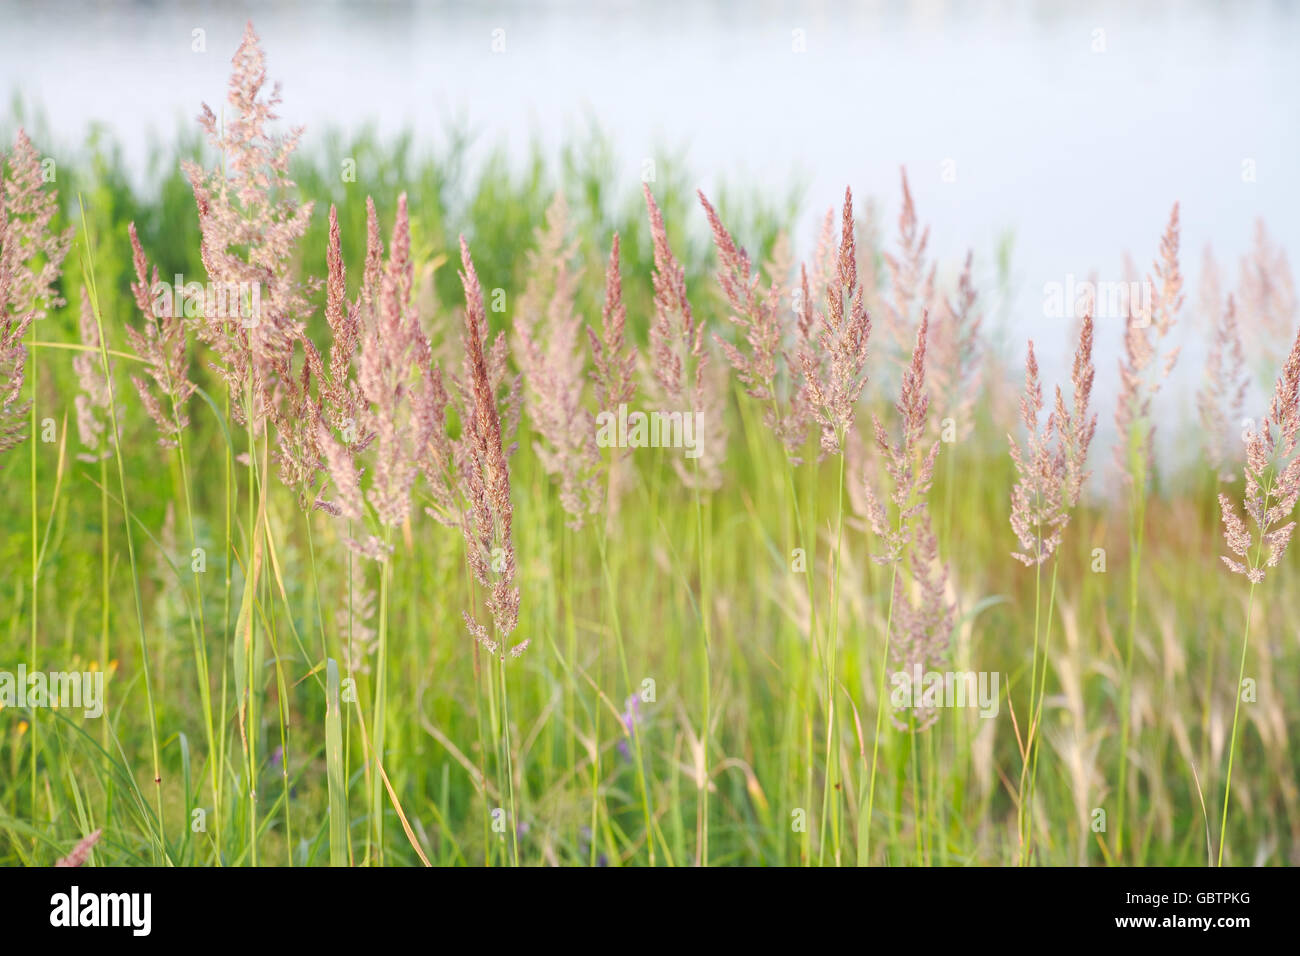 Reeds on the background of the pond Stock Photo